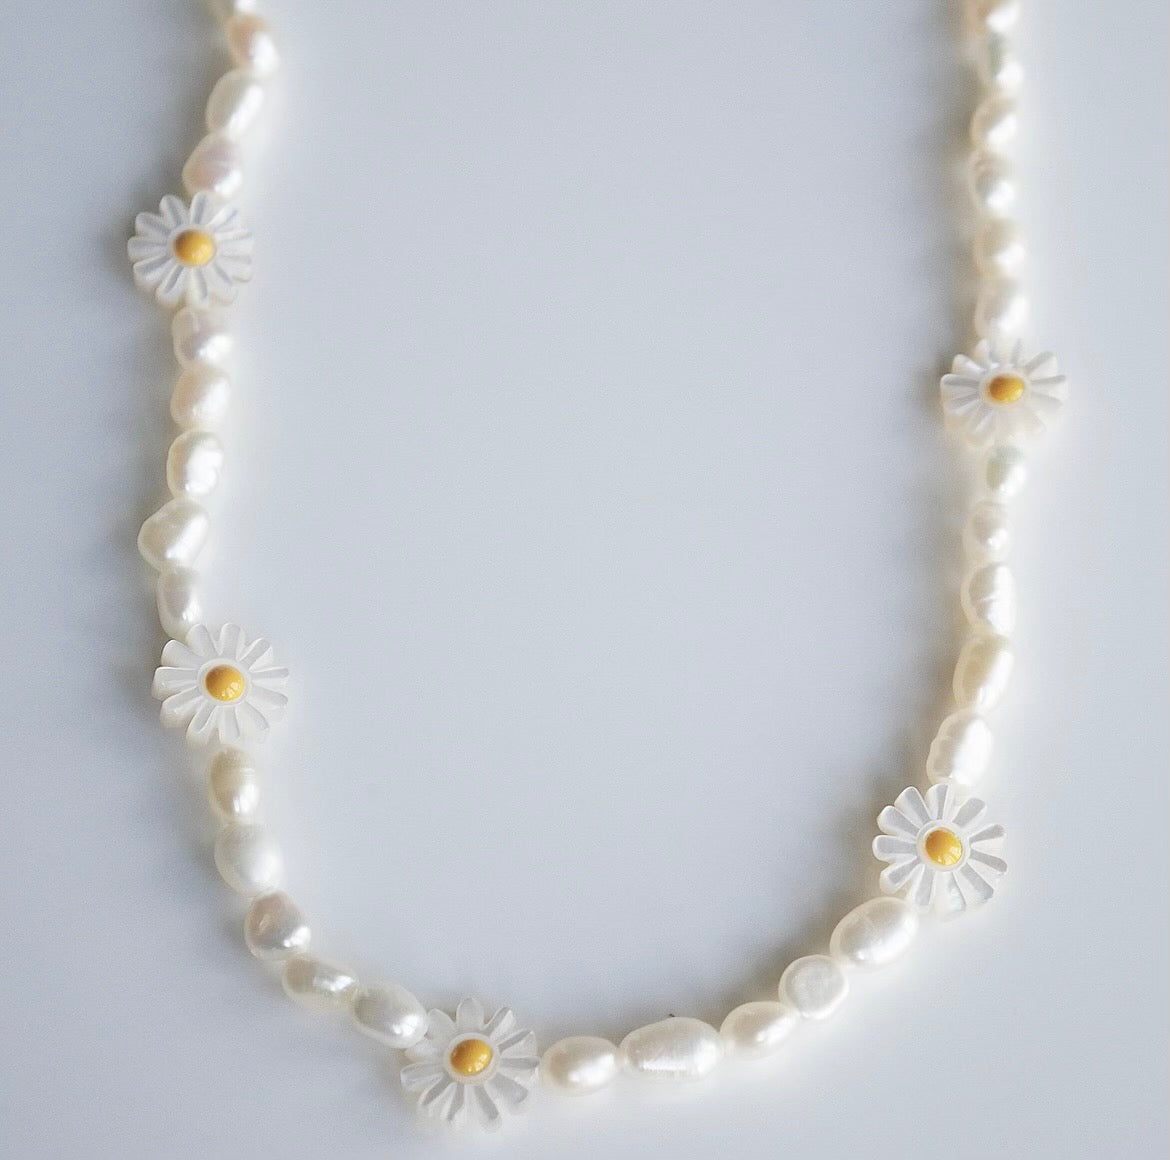 Sunflower-pearl-neecklace-freshwater-peals-real-sterling-silver-cute-chokers-waterproof-will-not-tarnish-chokers-men-kids-shopping-Miami-Brickell-Jewelry-trending-popular-necklace-sterling-silver-Kesley-Boutique